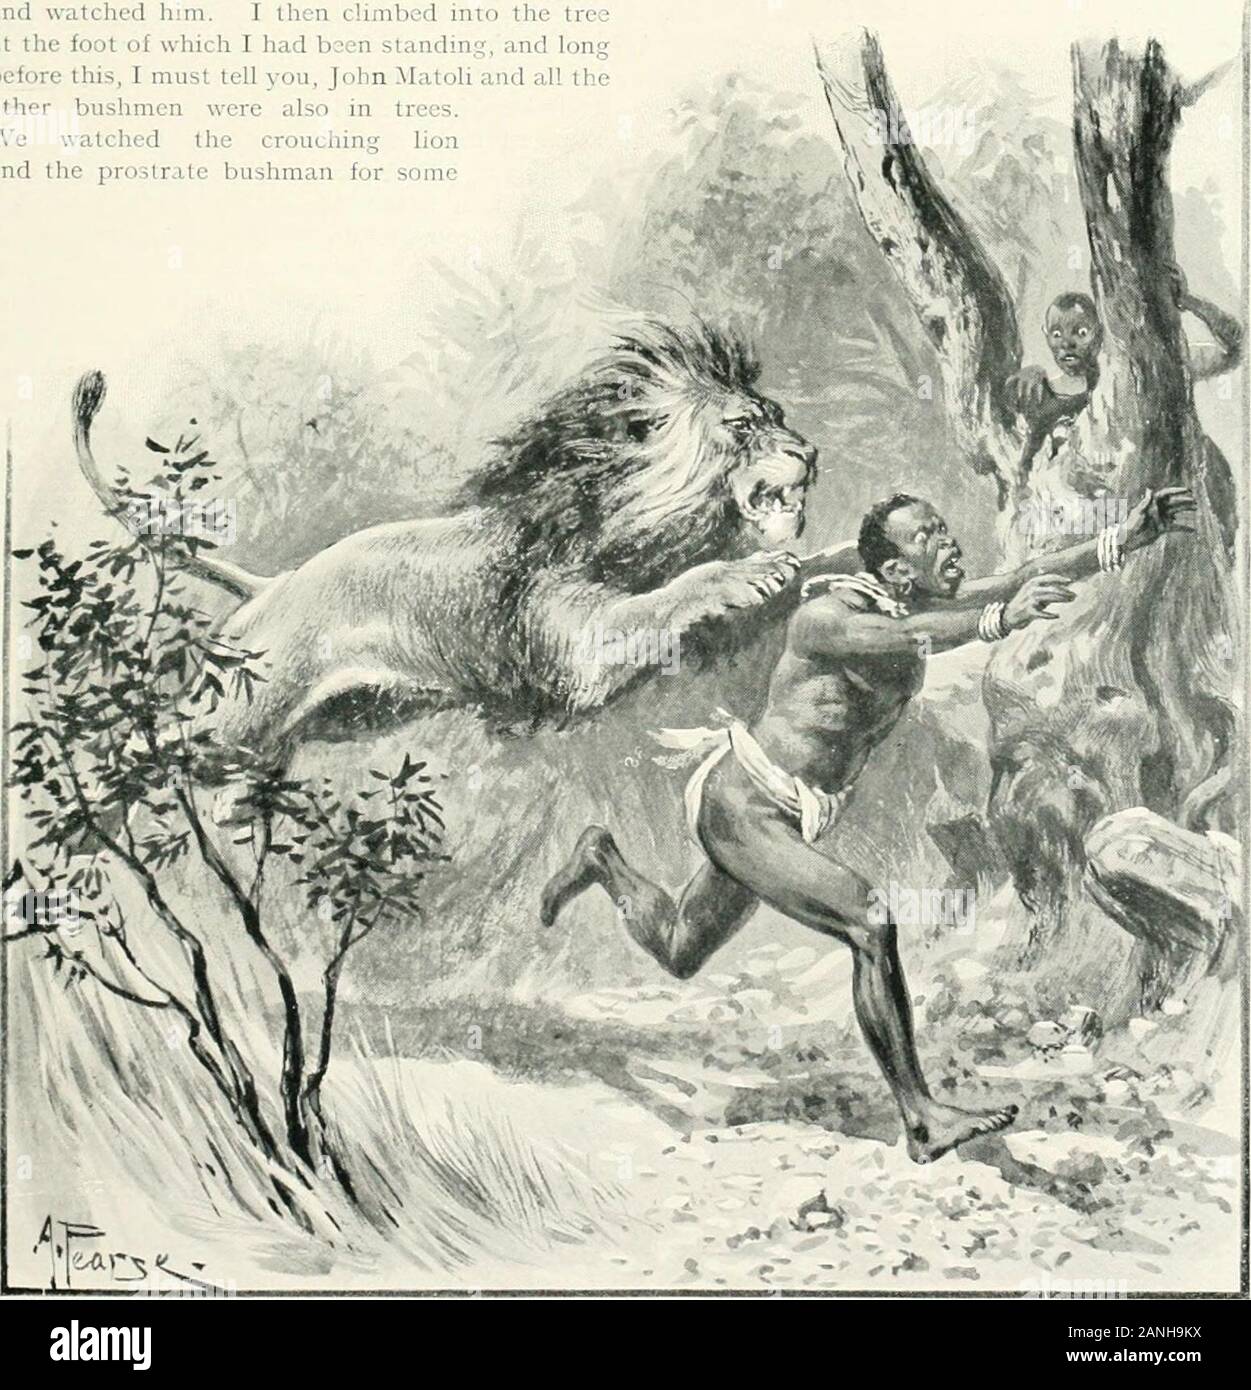 The sports of the world, with illustrations from drawings and photographs . lay di wnand watched him. I then climbed into the treeat the foot of winch I had b n standing, and long tins, 1 mu-,: tell you, John Matoli and all the bushmen were also in tiWe watched the crouching Lionand the prostrate bushman for some hours. The latter never moved, but I noticedthat the lion gradually changed his position, untilpresently he was lying flat on his side. I think hewas really dead then, but did not feel quite sure.However, towards evening John .Matoli, aftercalling to me, got down from his tree, and we Stock Photo